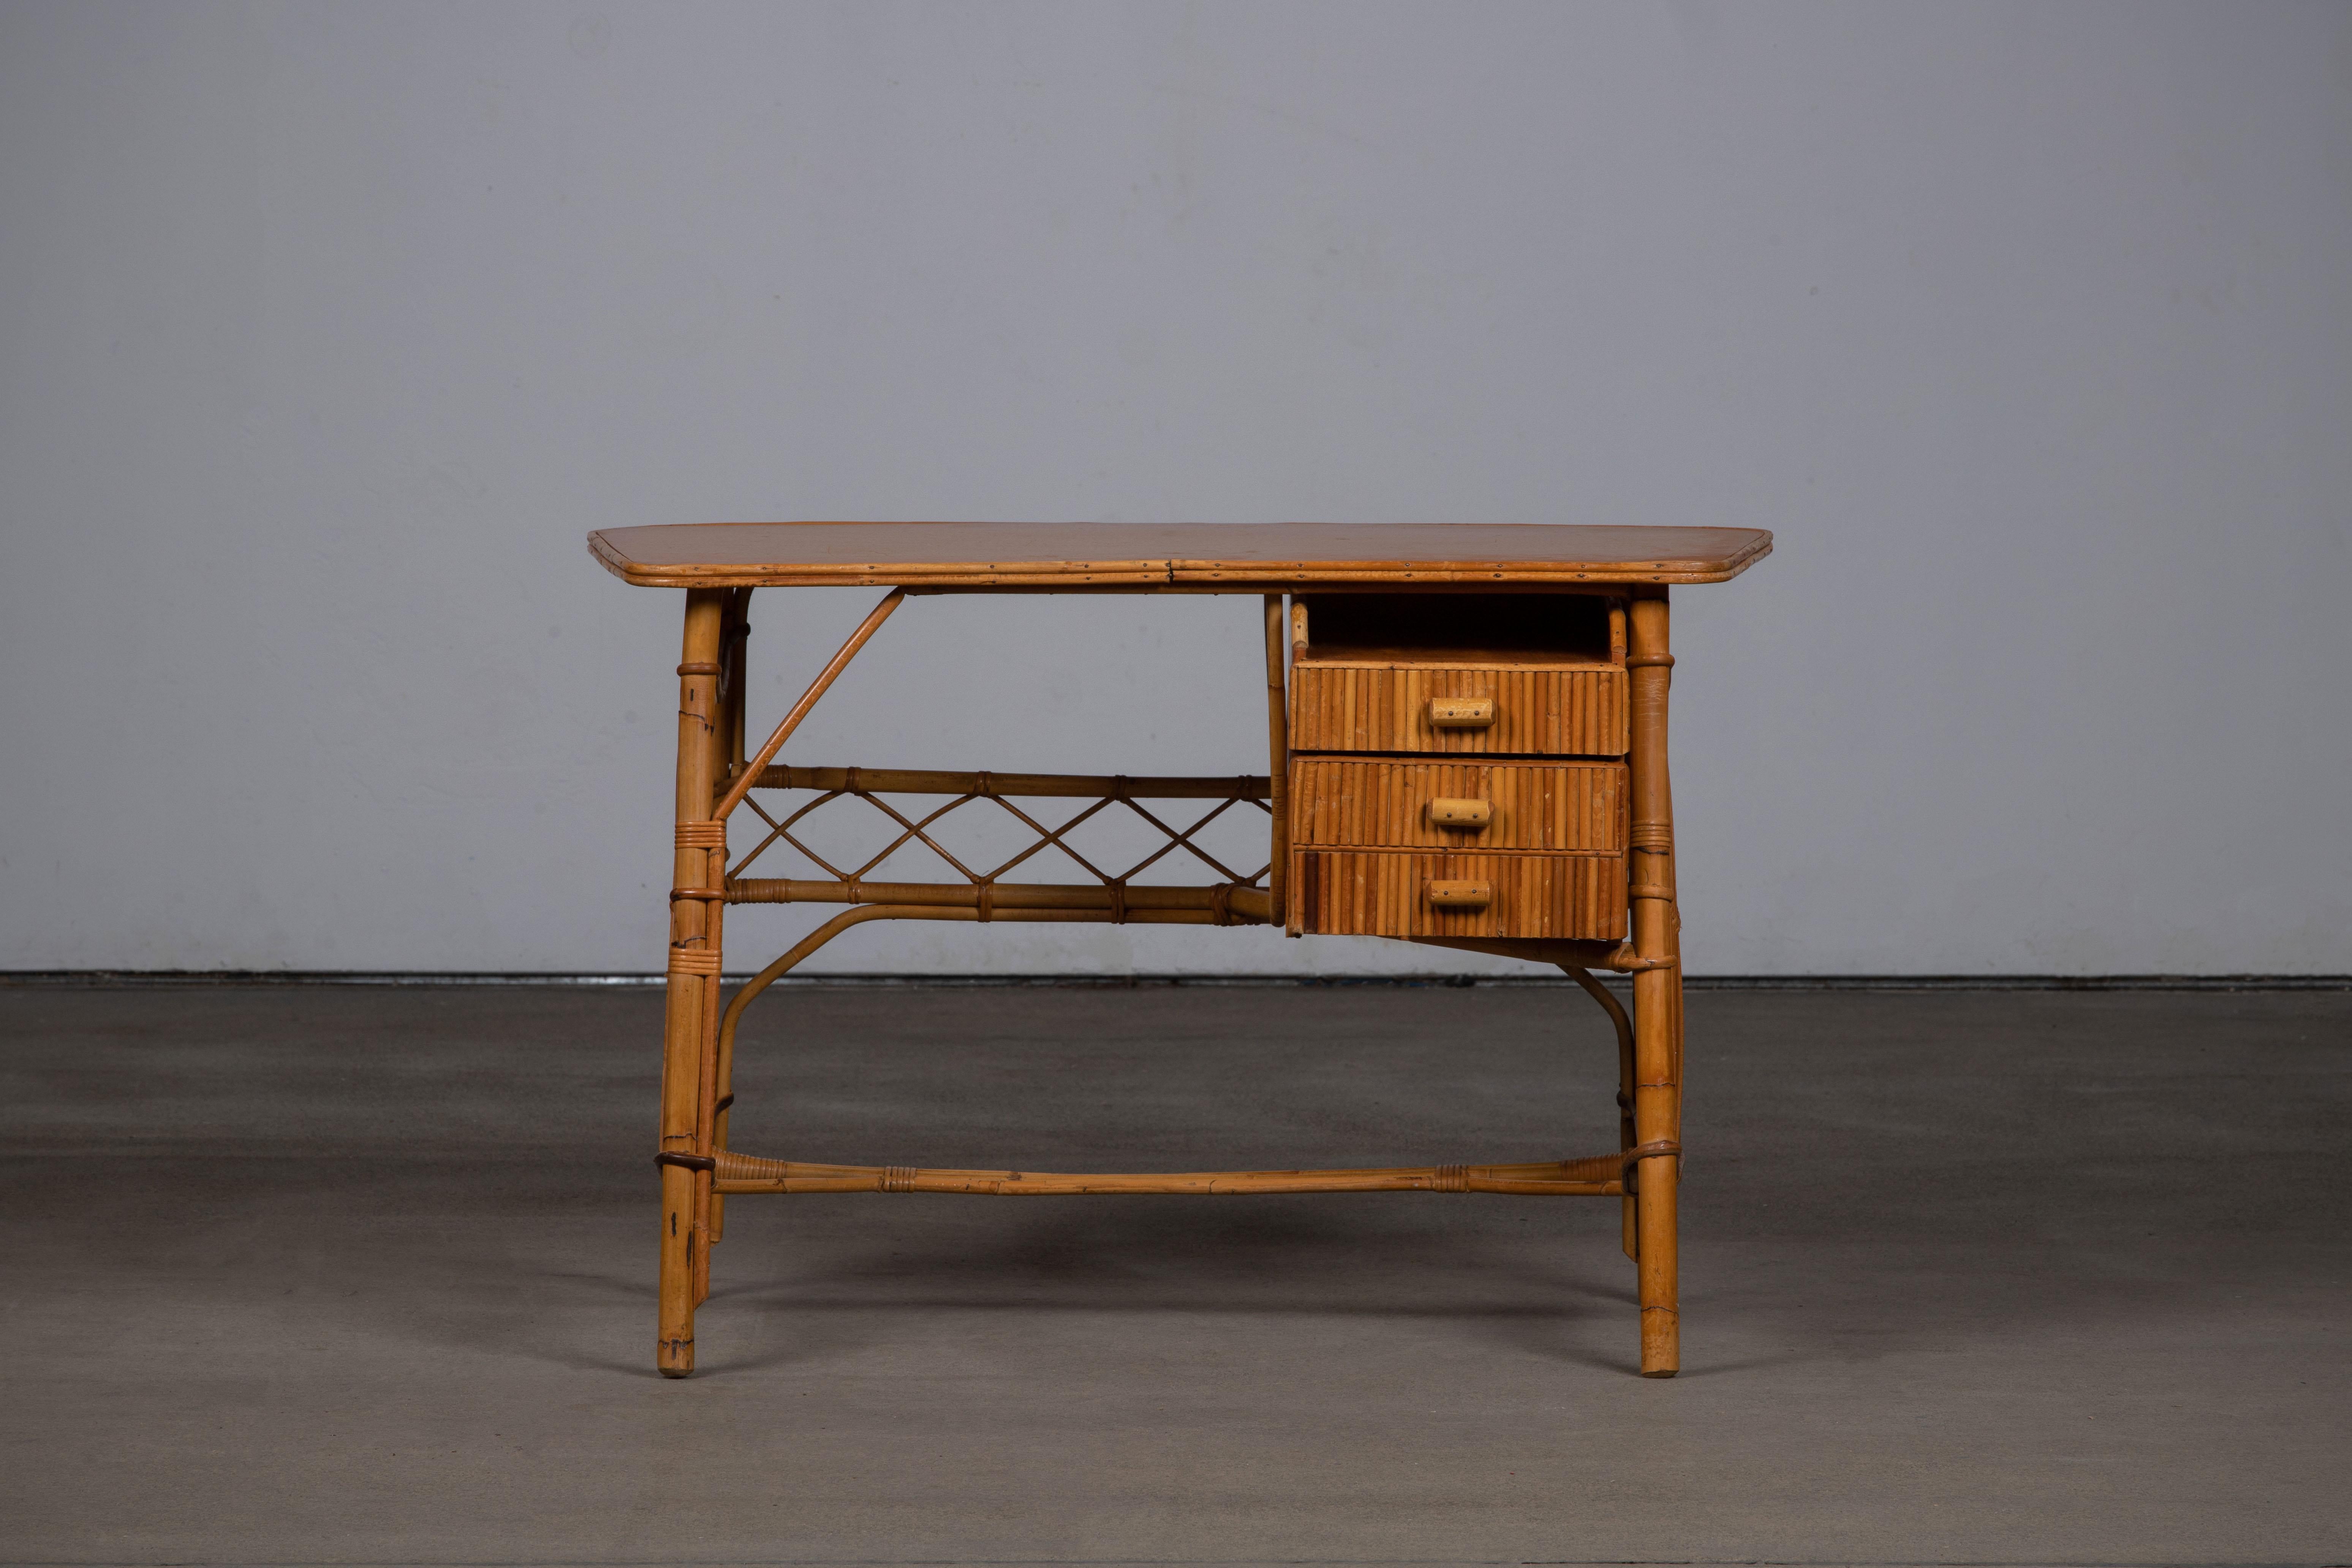 Desk Louis Sognot 50s
This pretty little vintage rattan desk from the 1950s by Louis SOGNOT can be used by a child or an adult. It has a drawer whose ring-shaped handle is the designer's signature. The top is in light oak.
The plus: a clever